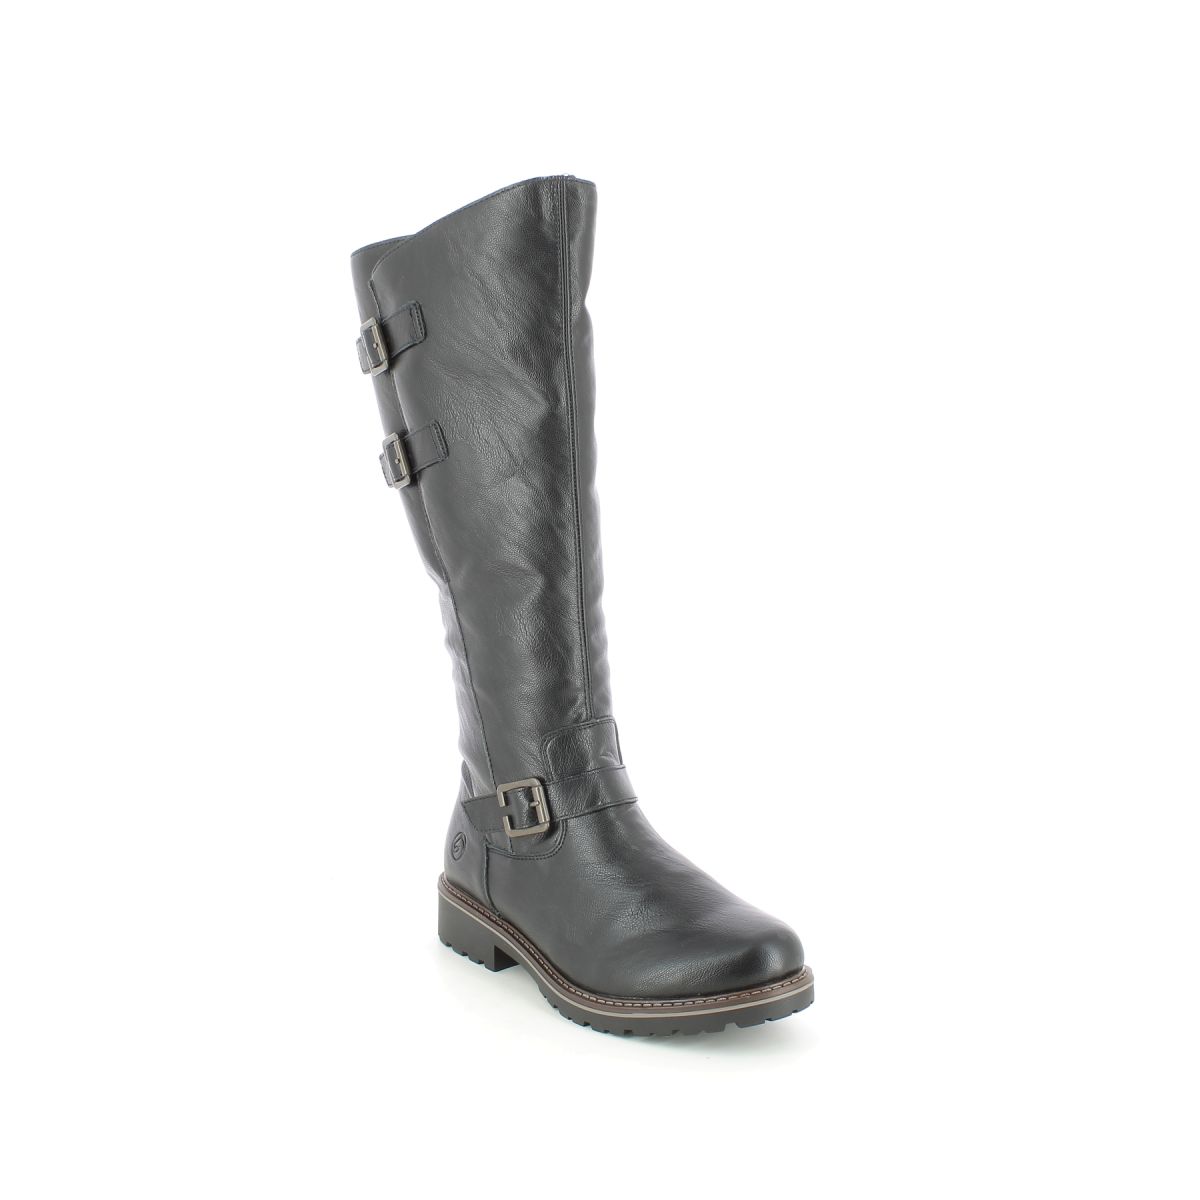 Remonte Indah Shearling Black Womens Knee-High Boots R6590-01 In Size 42 In Plain Black